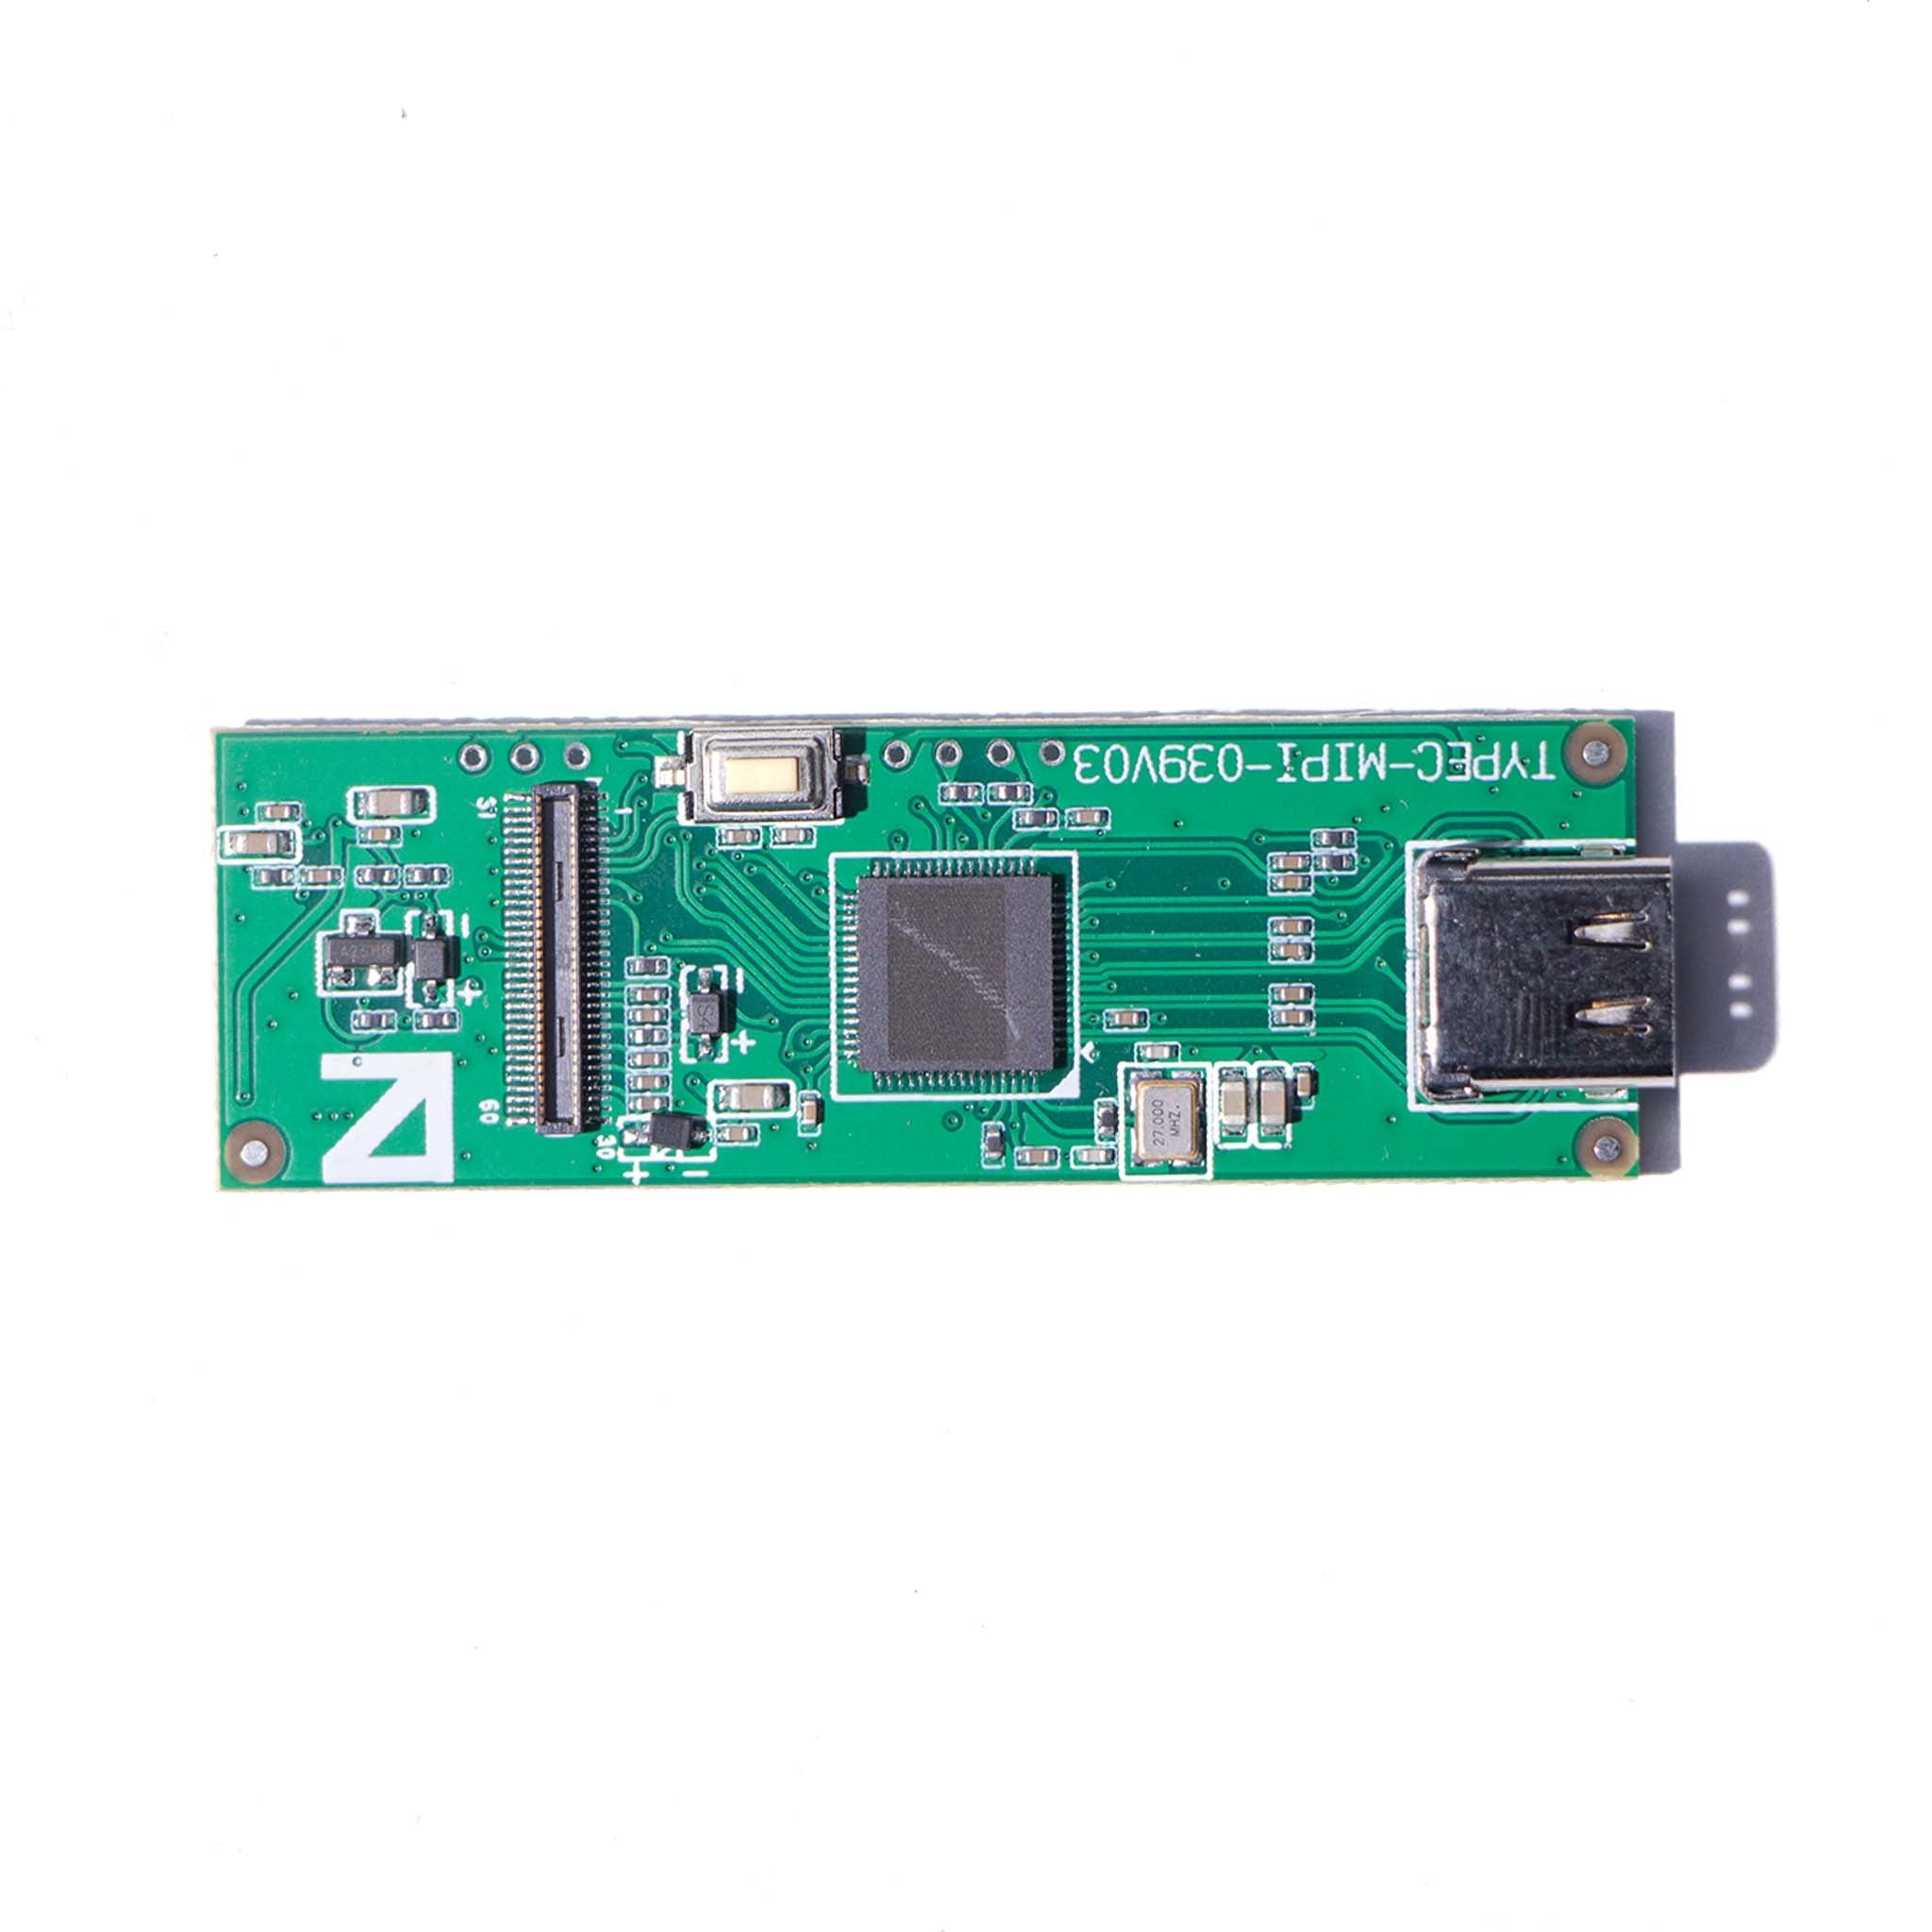 Adapter converting Type-C input to MIPI DSI output for display connectivity